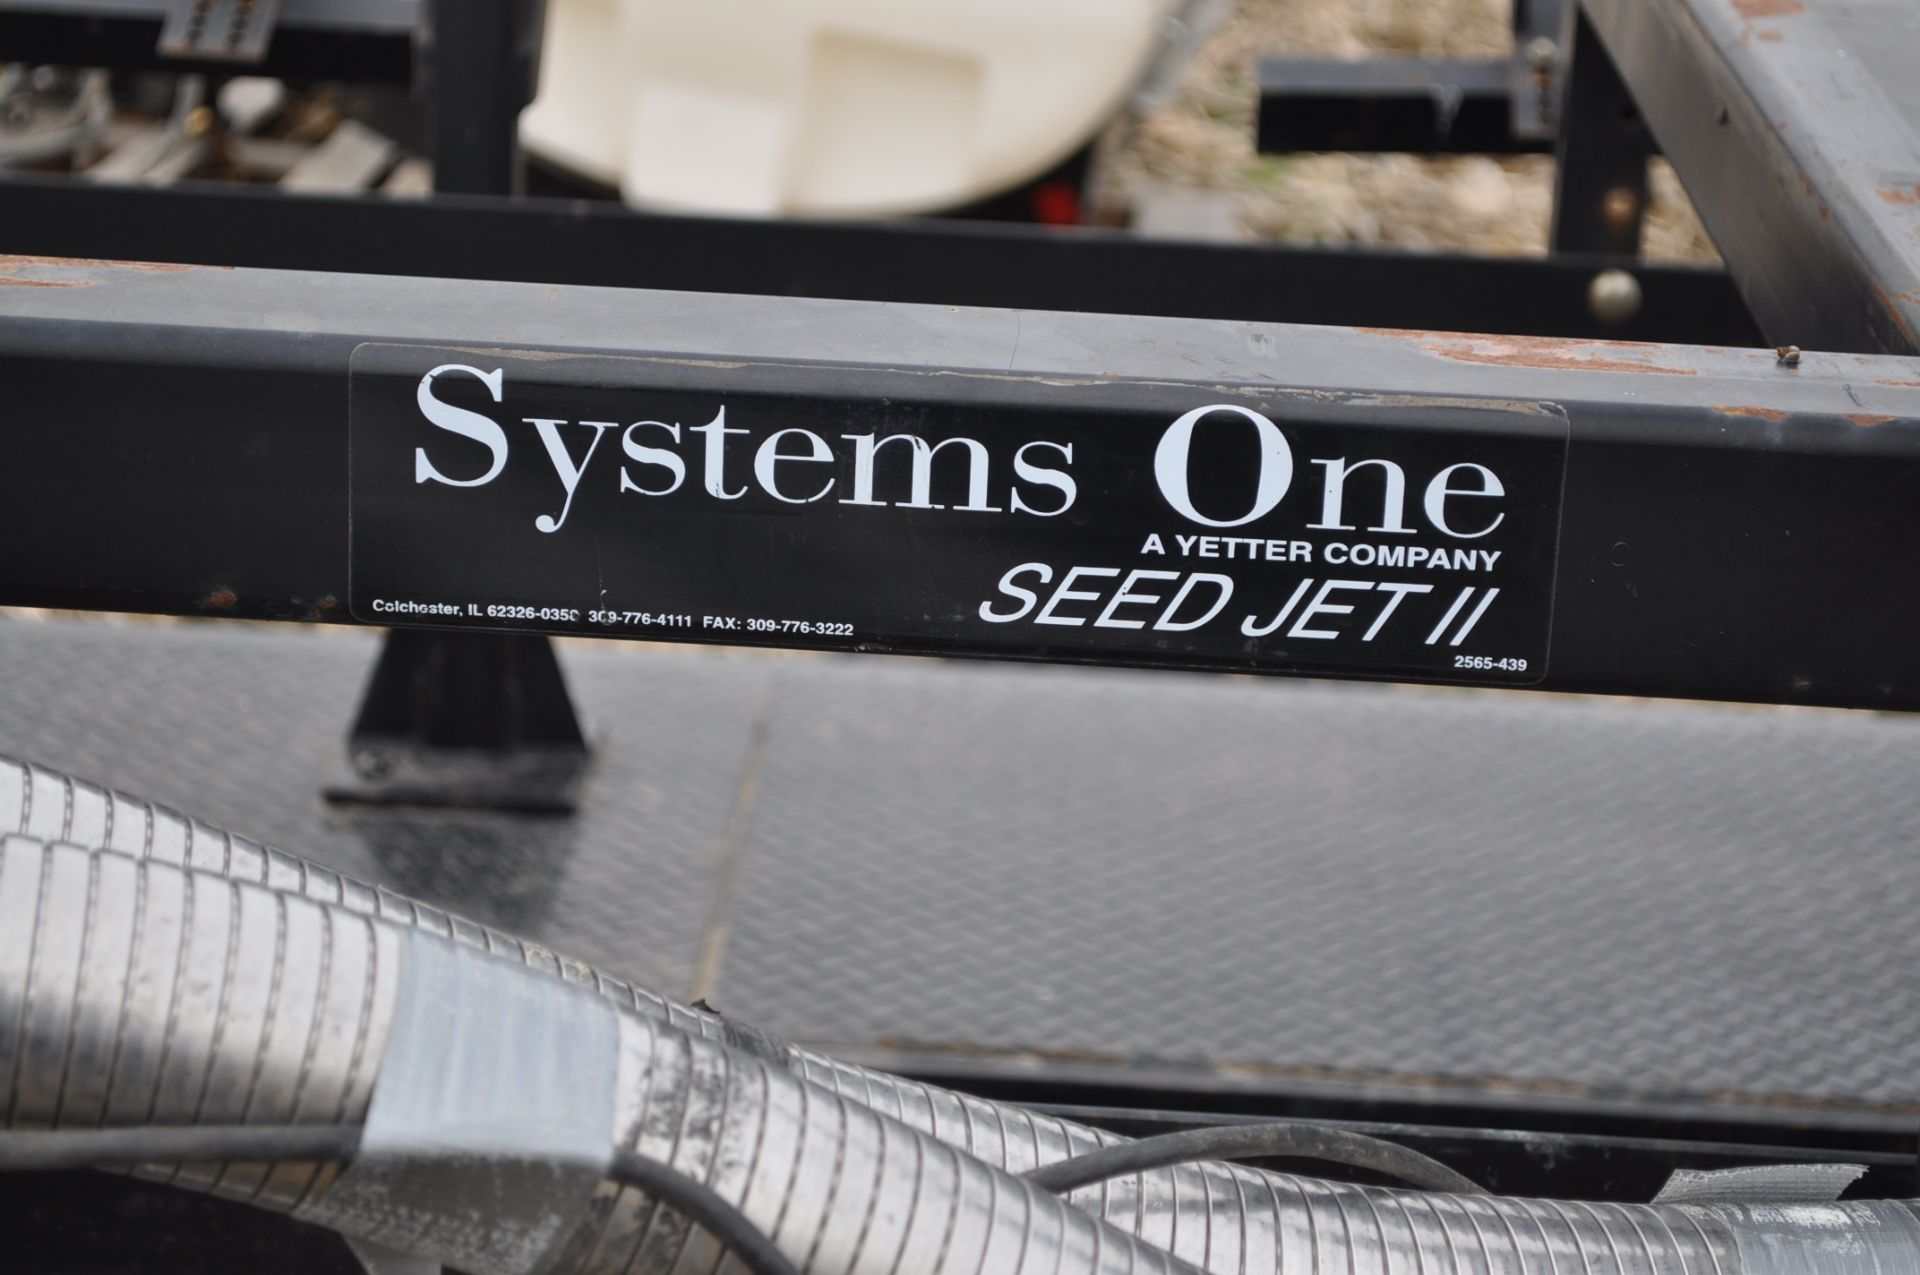 Yetter Seed Jet II air transfer seed tender, holds 2 pro boxes, Briggs & Stratton gas engine, on - Image 6 of 9